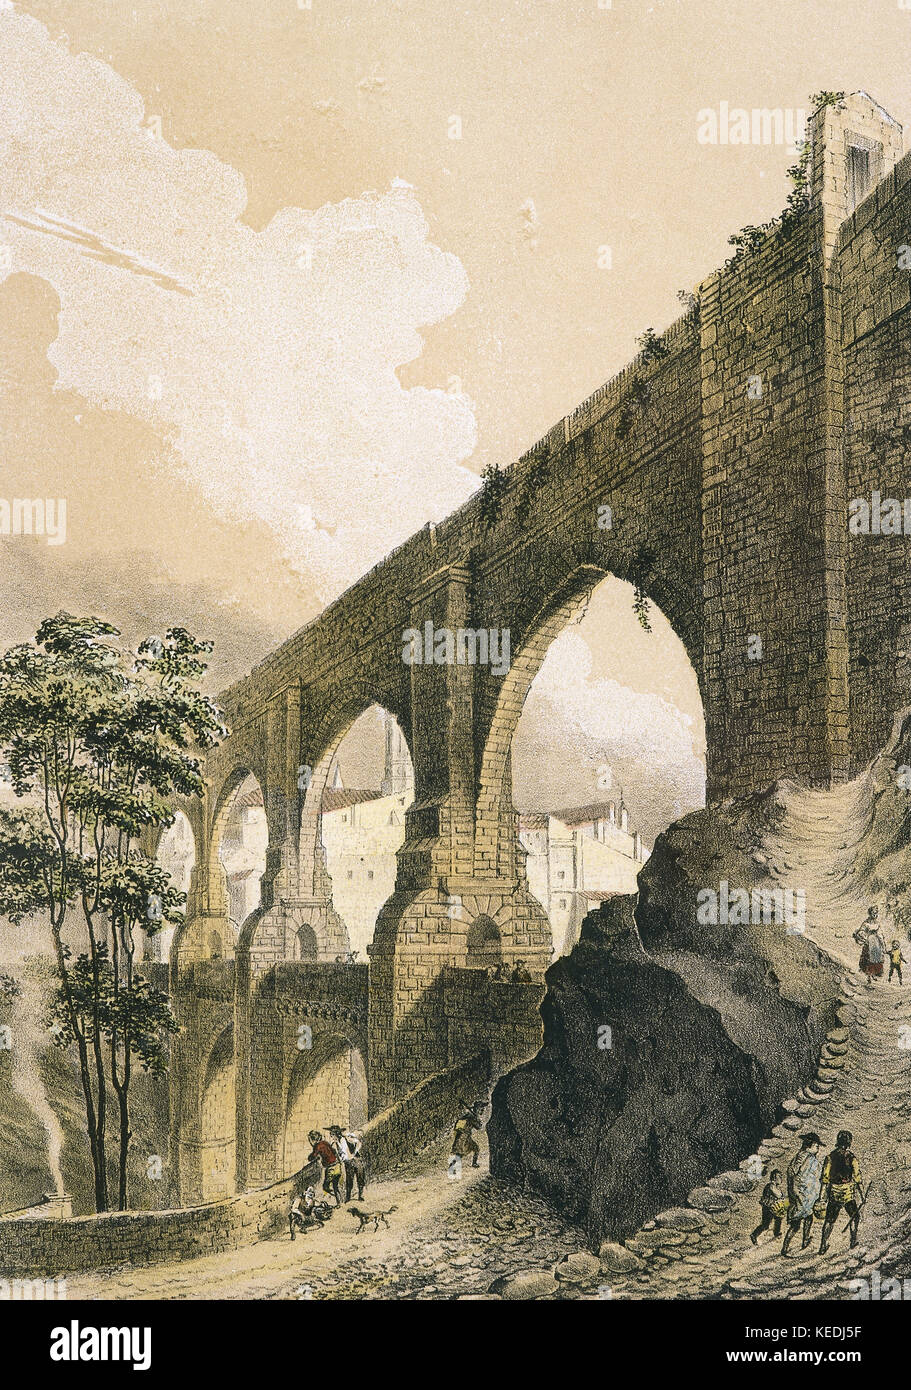 Spain. Aragon. Teruel. Los Arcos Aqueduct. One of the most relevant engineering works of the Spanish Renaissance. It was built between 1537-1558. In 1551 was commissioned the resumption of the construction to the architect Quinto Pierres Bedel (1543-1567). Engraving by Parcerisa, 19th century. Color Lithography. Stock Photo